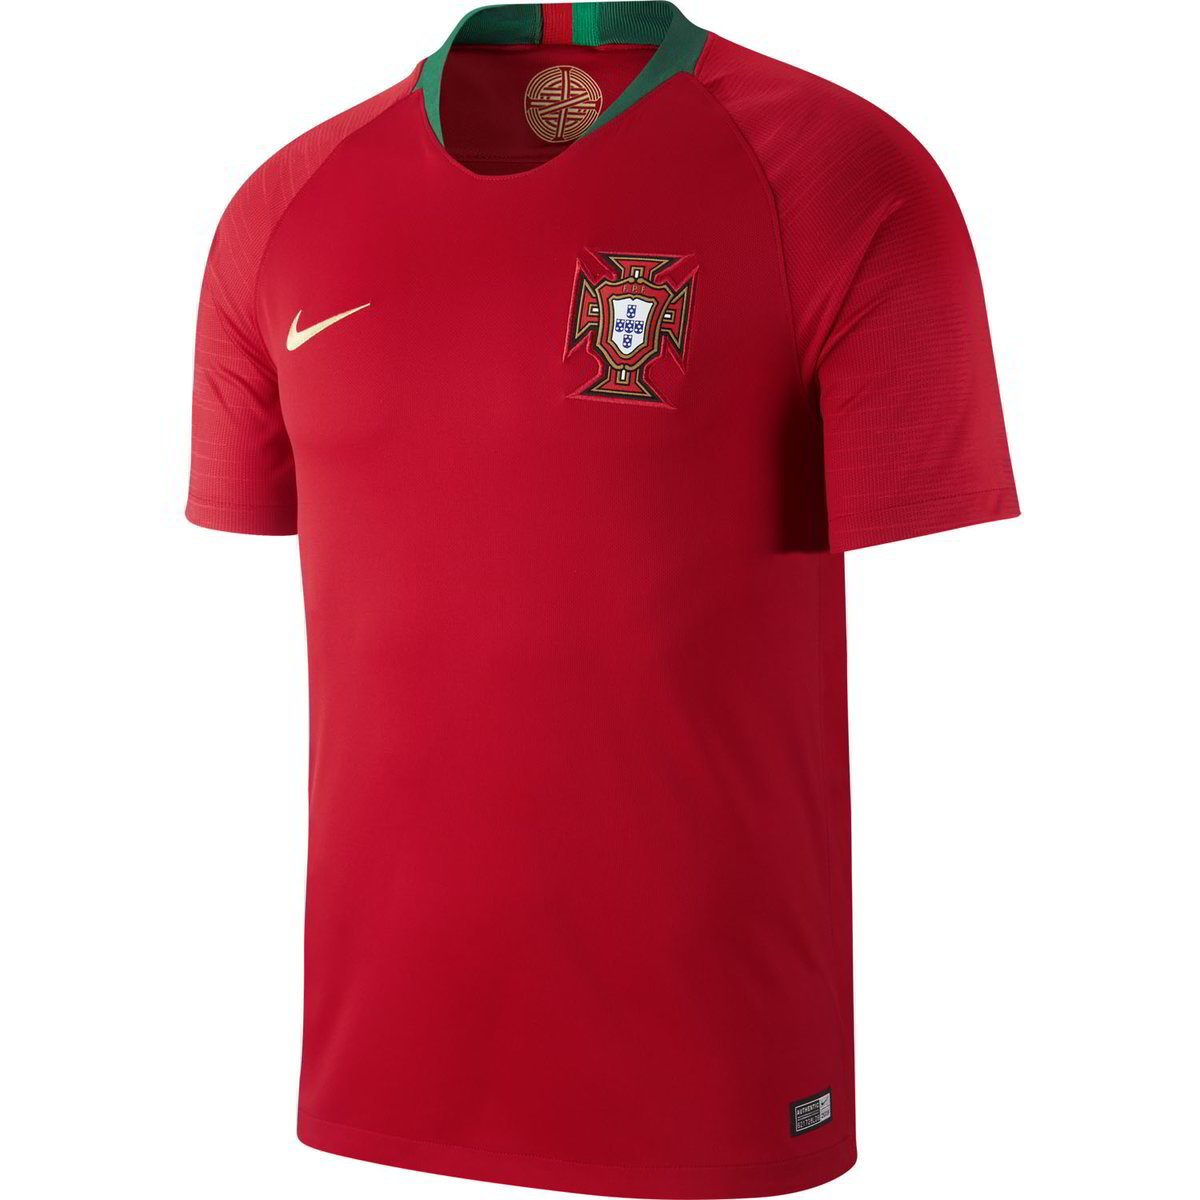 new portugal jersey 2019